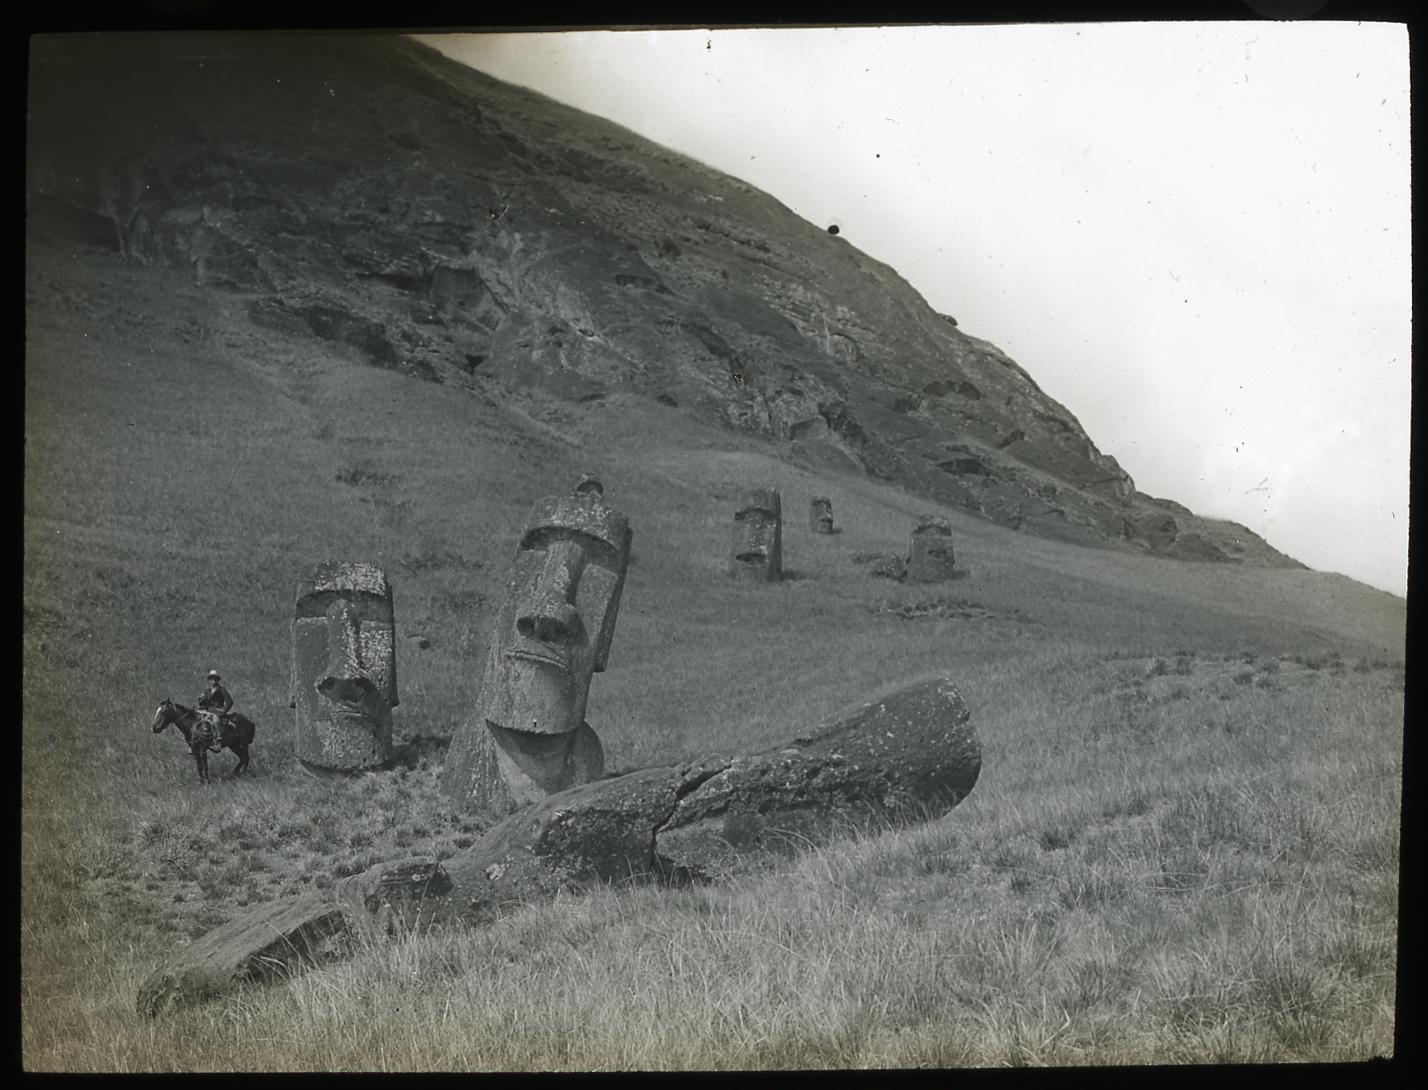 View of the northeast of the exterior slopes of the quarry, with several moai on the slopes, Rapa Nui (Easter Island), Katherine Maria Routledge, c. 1914–15, 8.2 x 8.2 cm, lantern slide (photograph) (© Trustees of the British Museum)